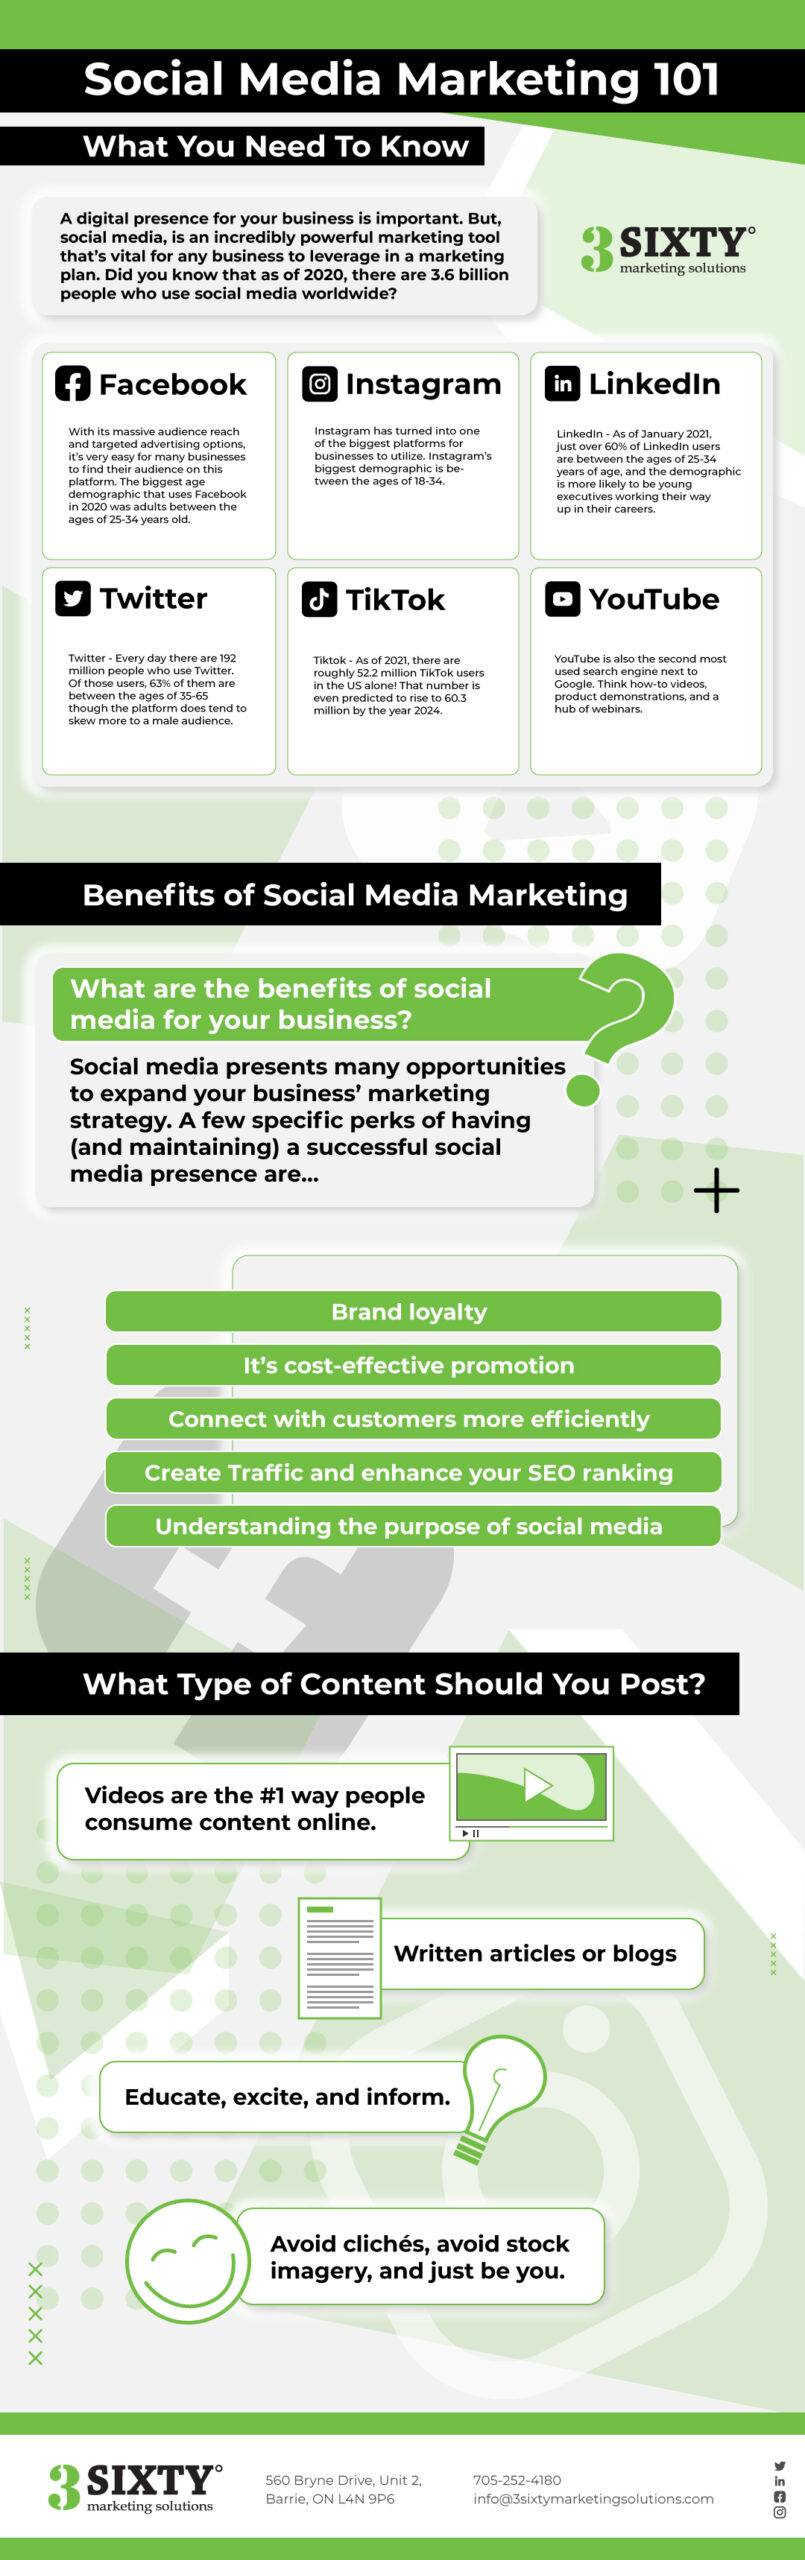 Infographic for Social Media Marketing 101 showing information mentioned in blog post.